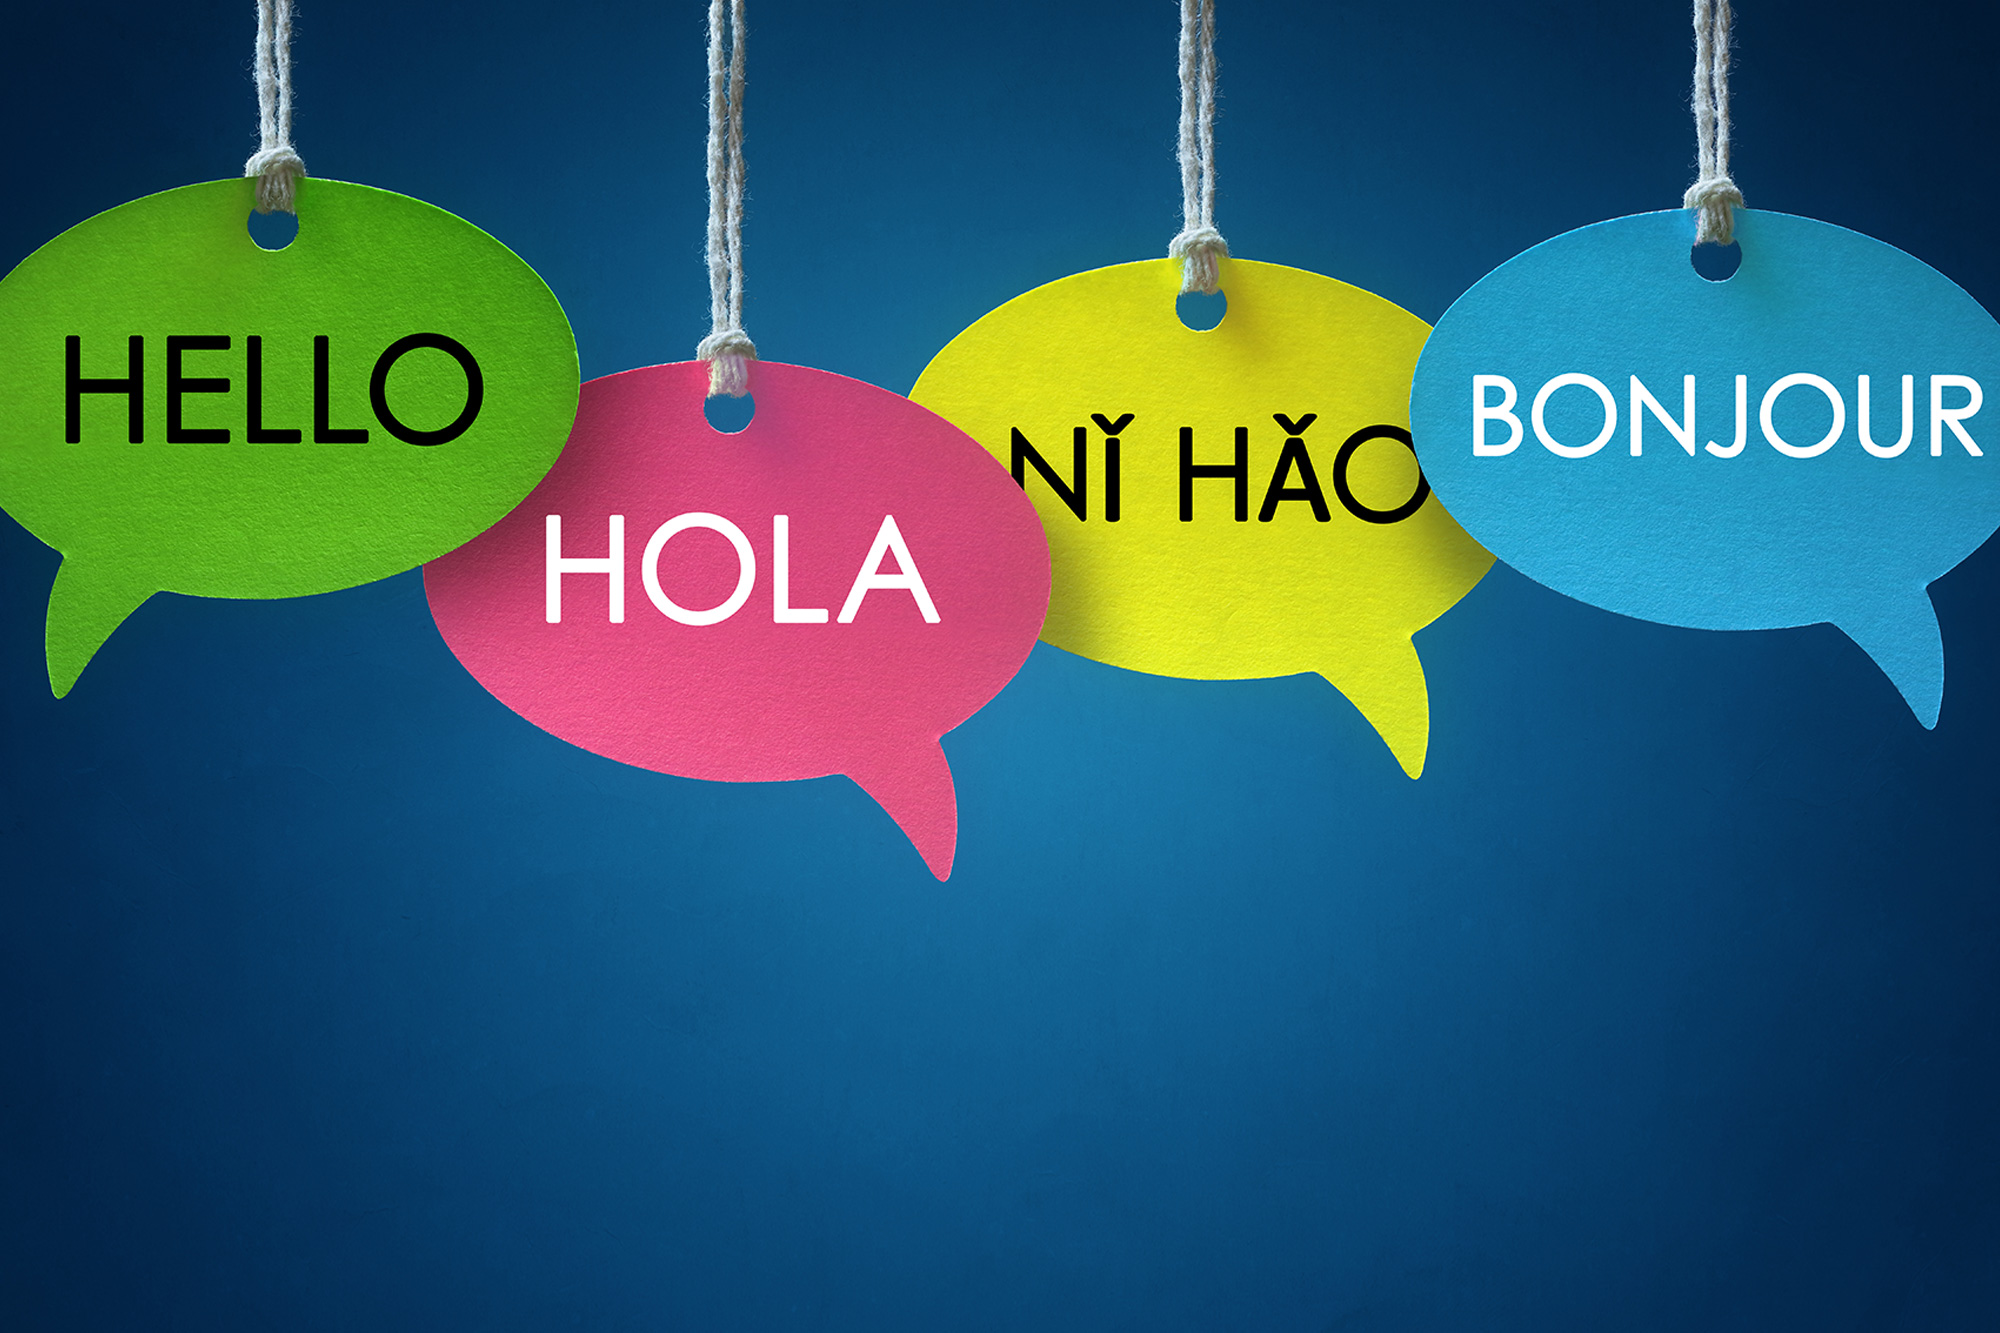 Multicolored speech bubbles with “Hello” in various languages.